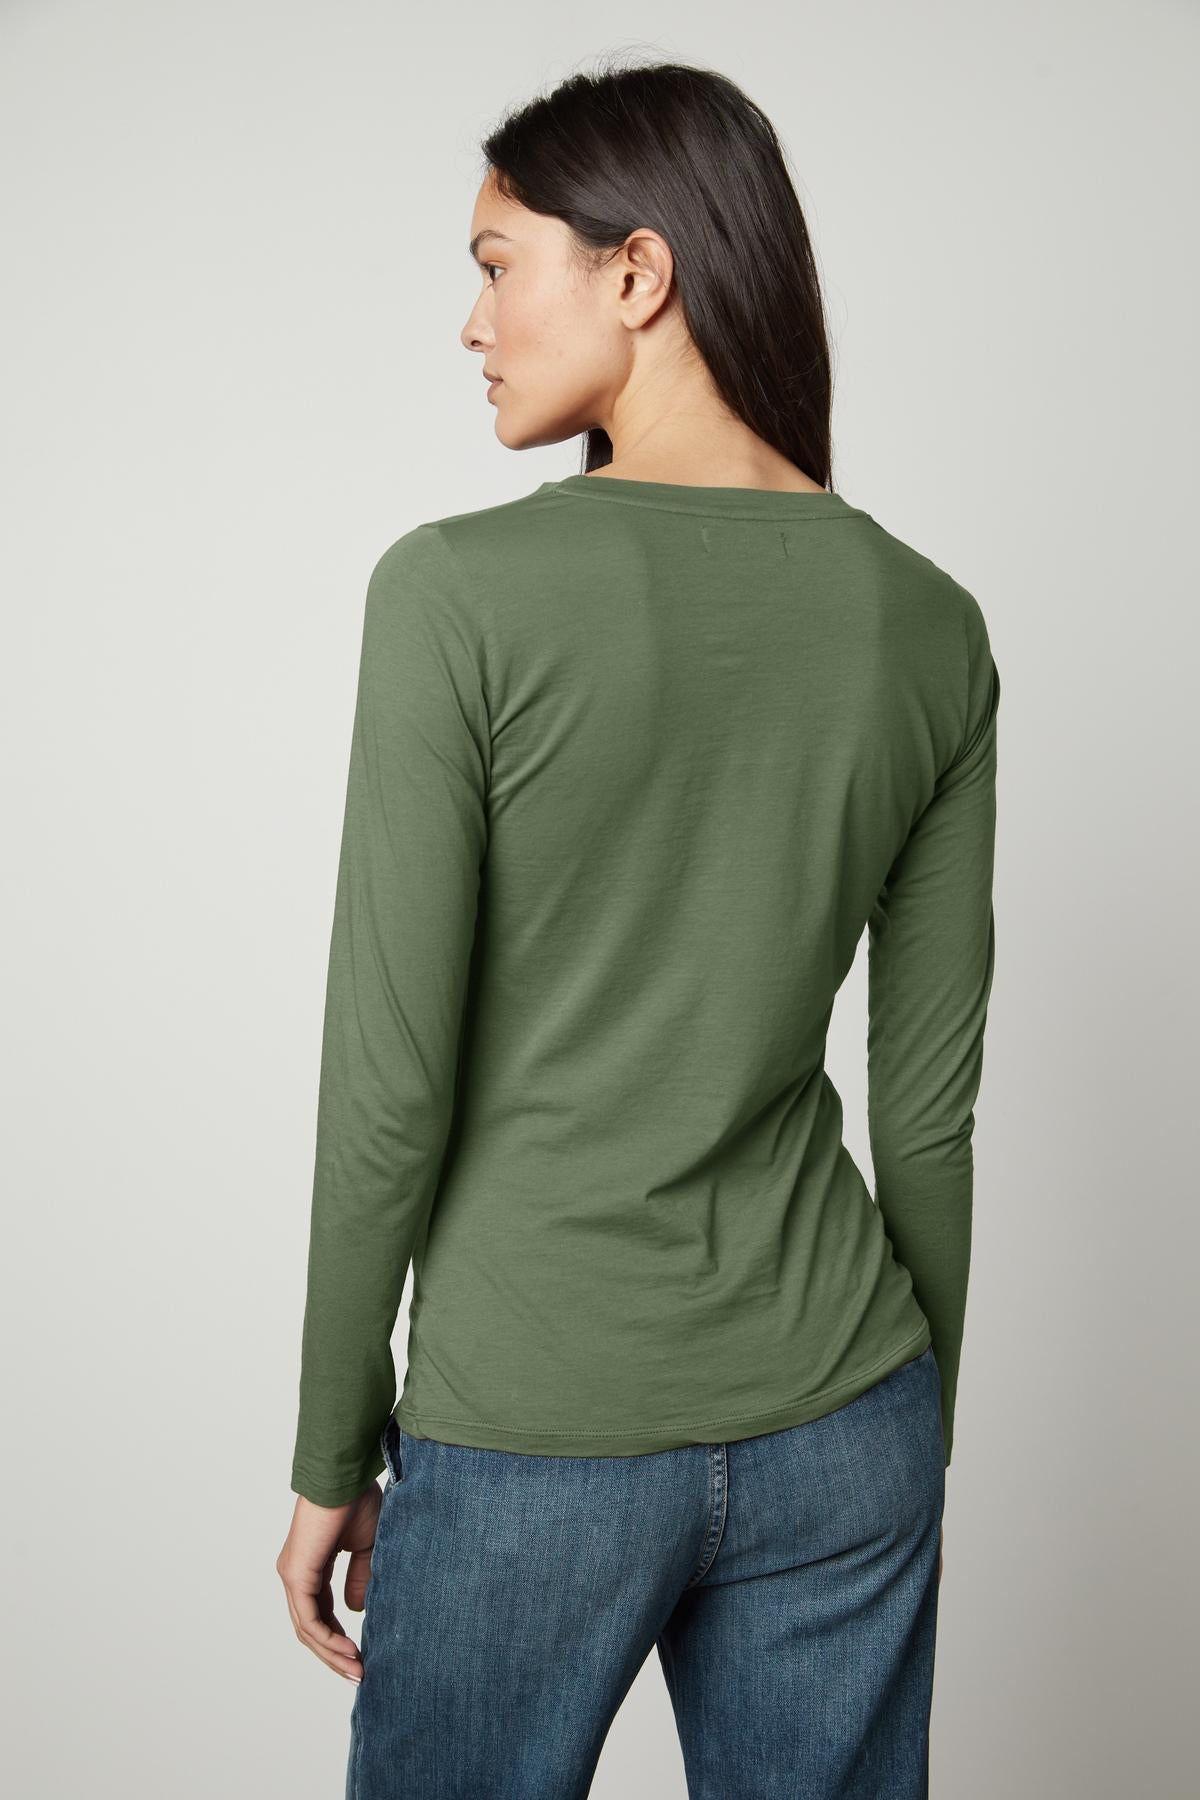   The back view of a person wearing a Velvet by Graham & Spencer ZOFINA GAUZY WHISPER FITTED CREW NECK TEE. 